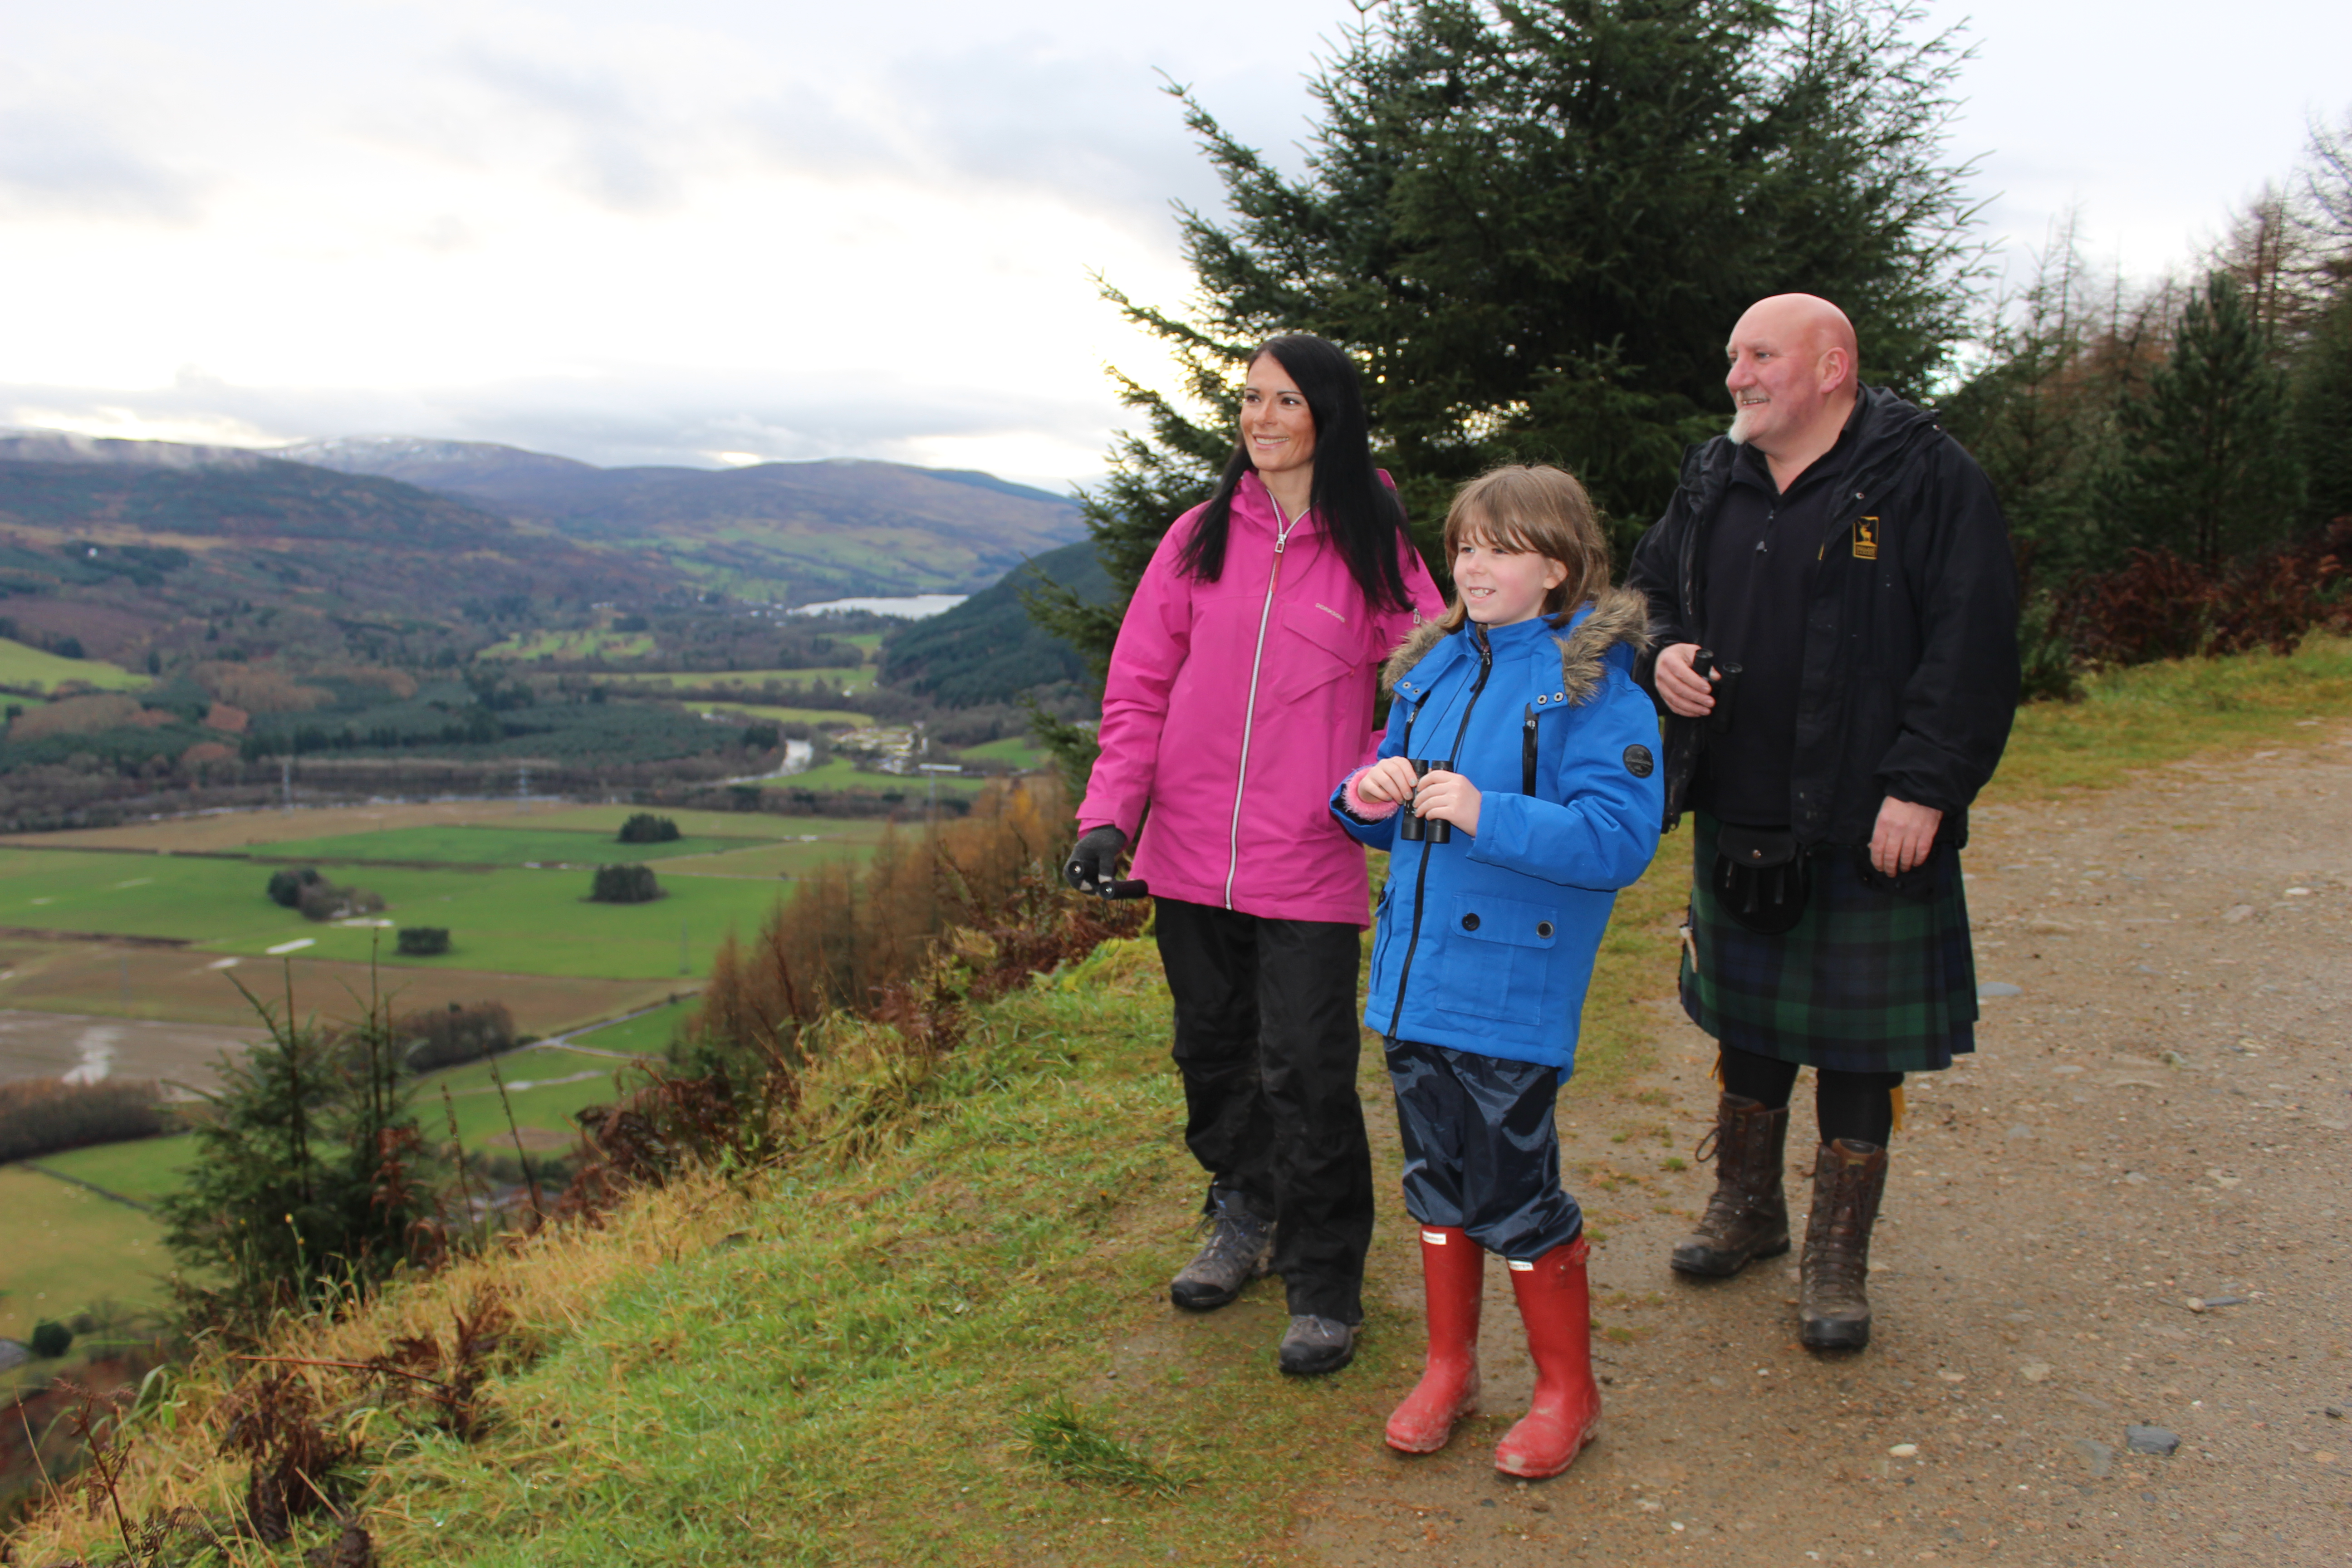 Gayle Ritchie, Deia Wilkinson and Highland Safari Winter Watch guide Jim Scotland gaze out over Strathtay Valley.